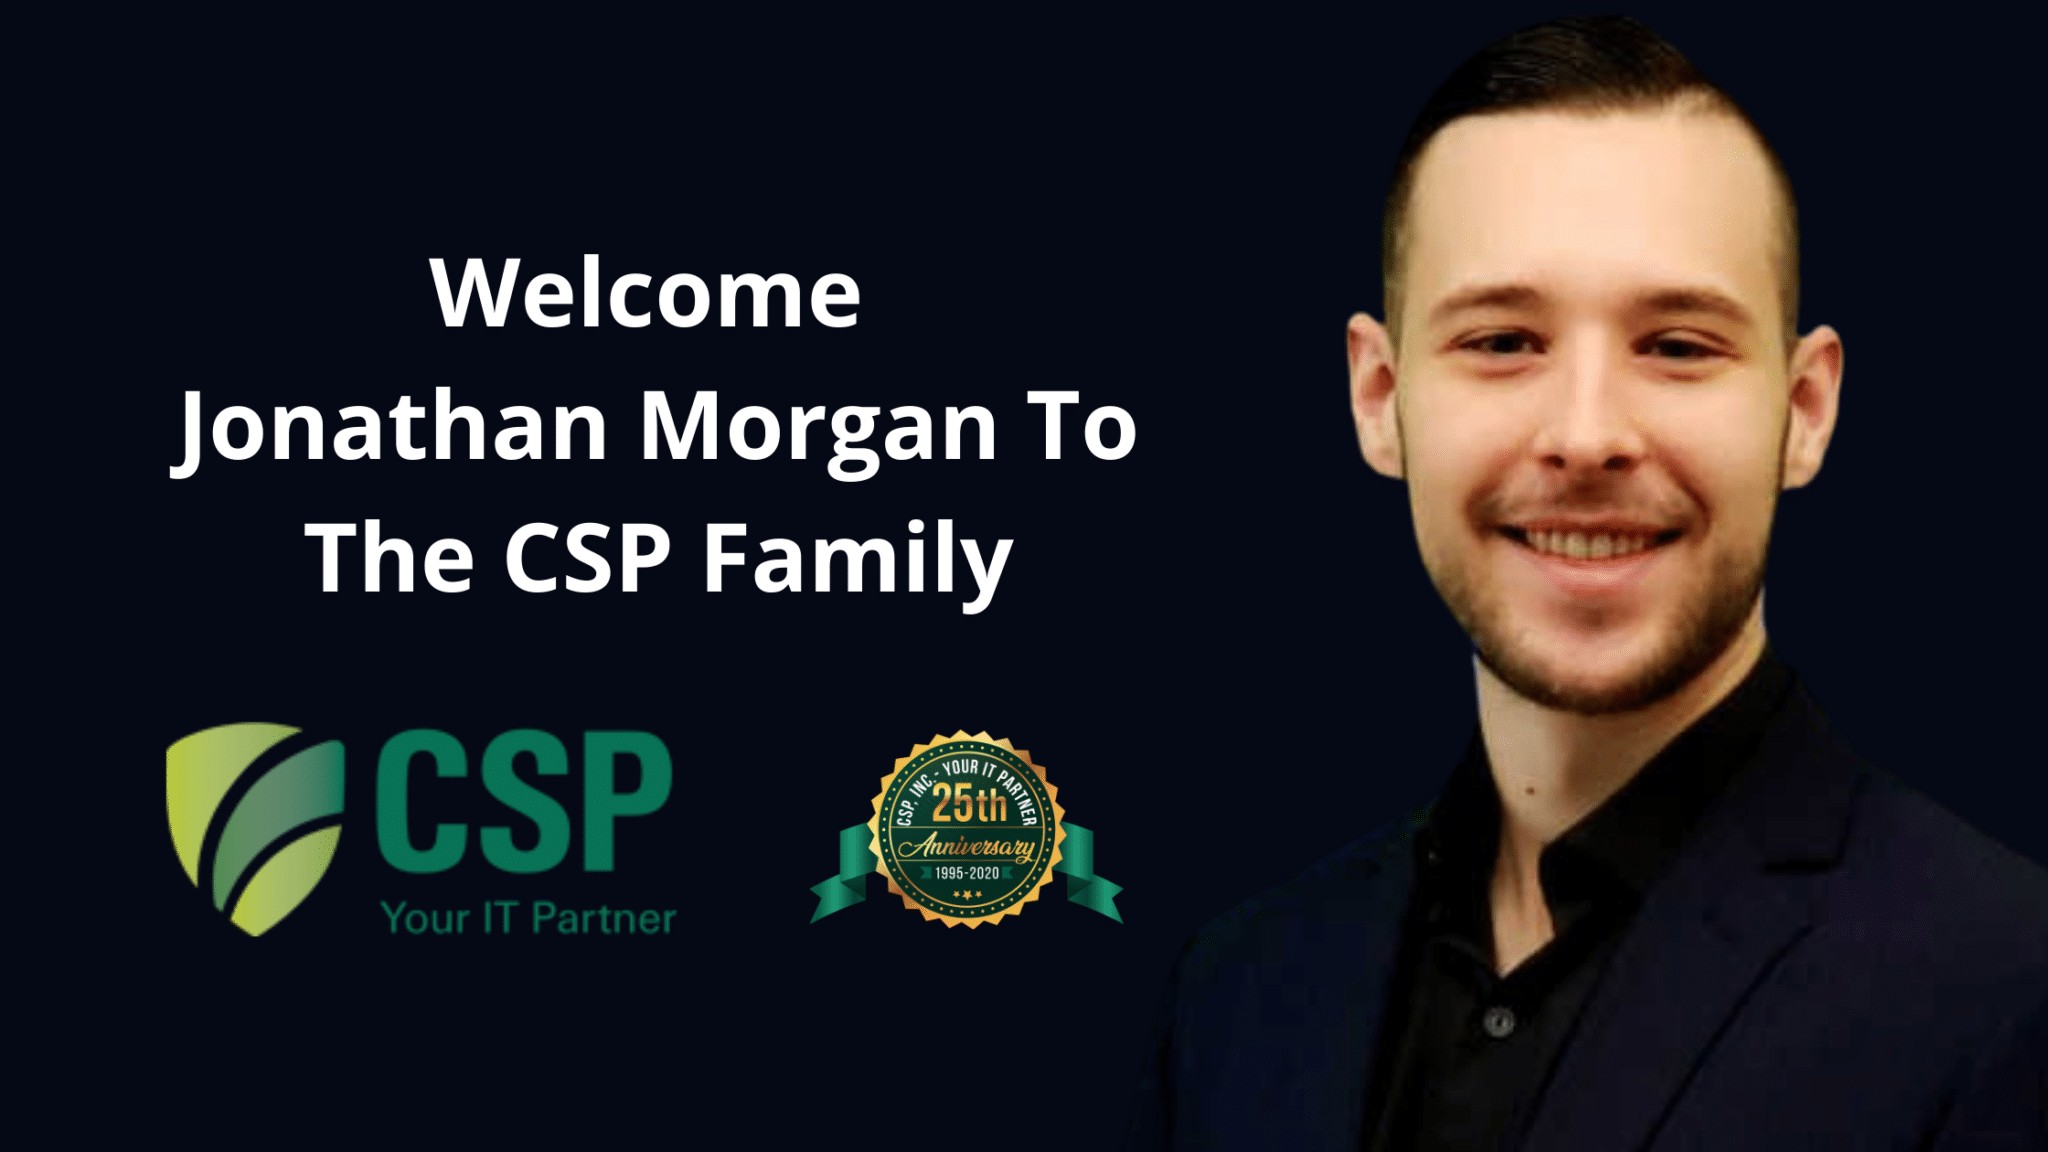 _Welcome Jonathan Morgan To The CSP Family